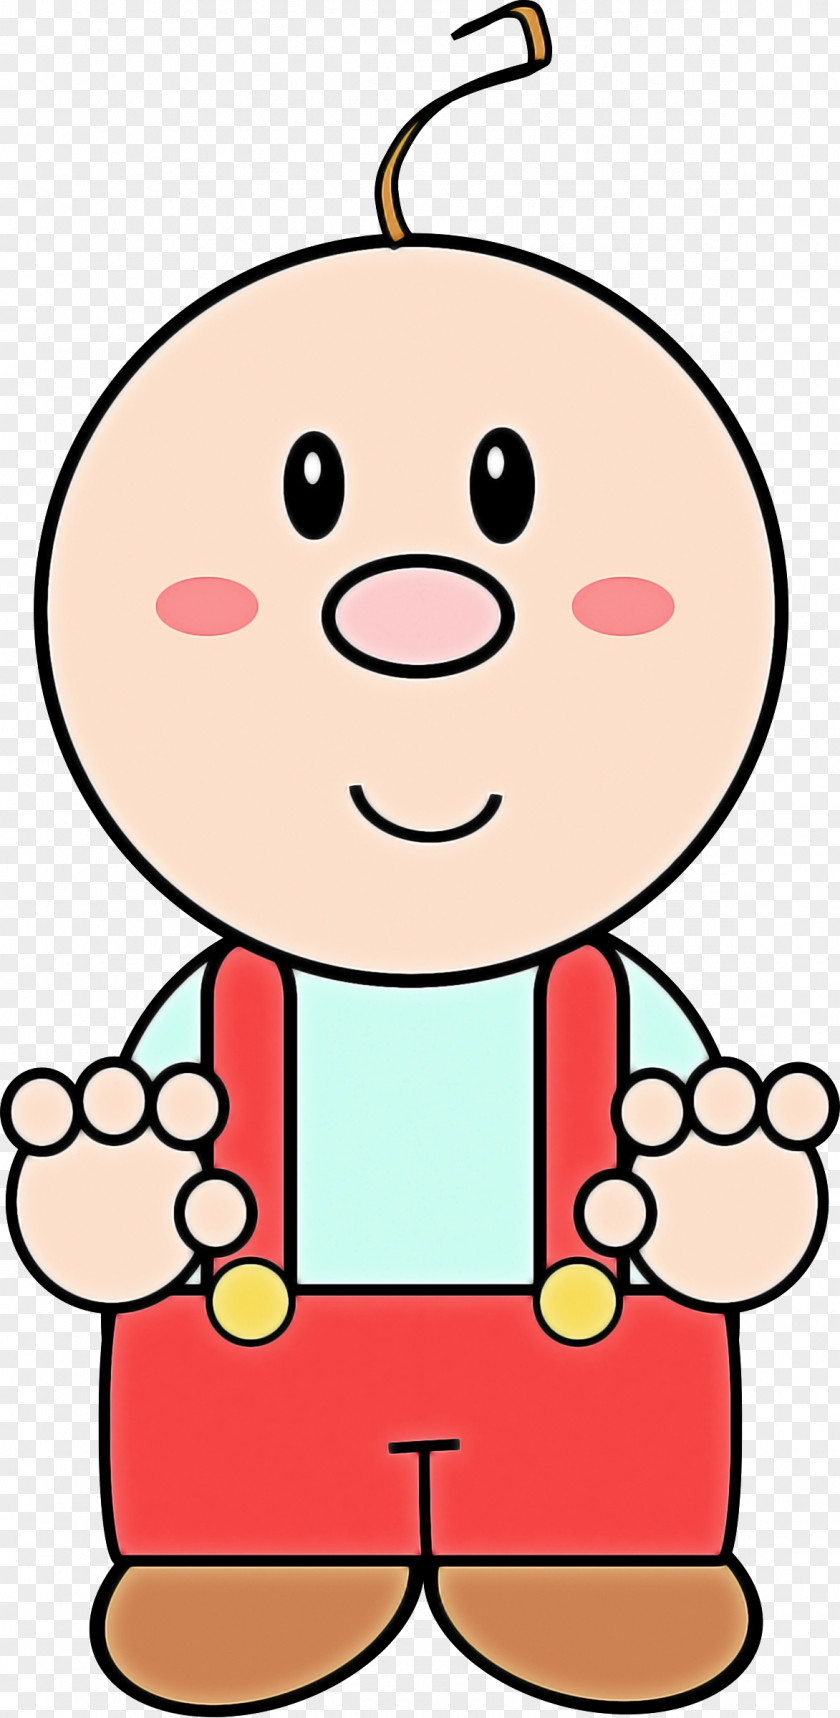 Finger Head Cartoon Cheek Pink Red Facial Expression PNG